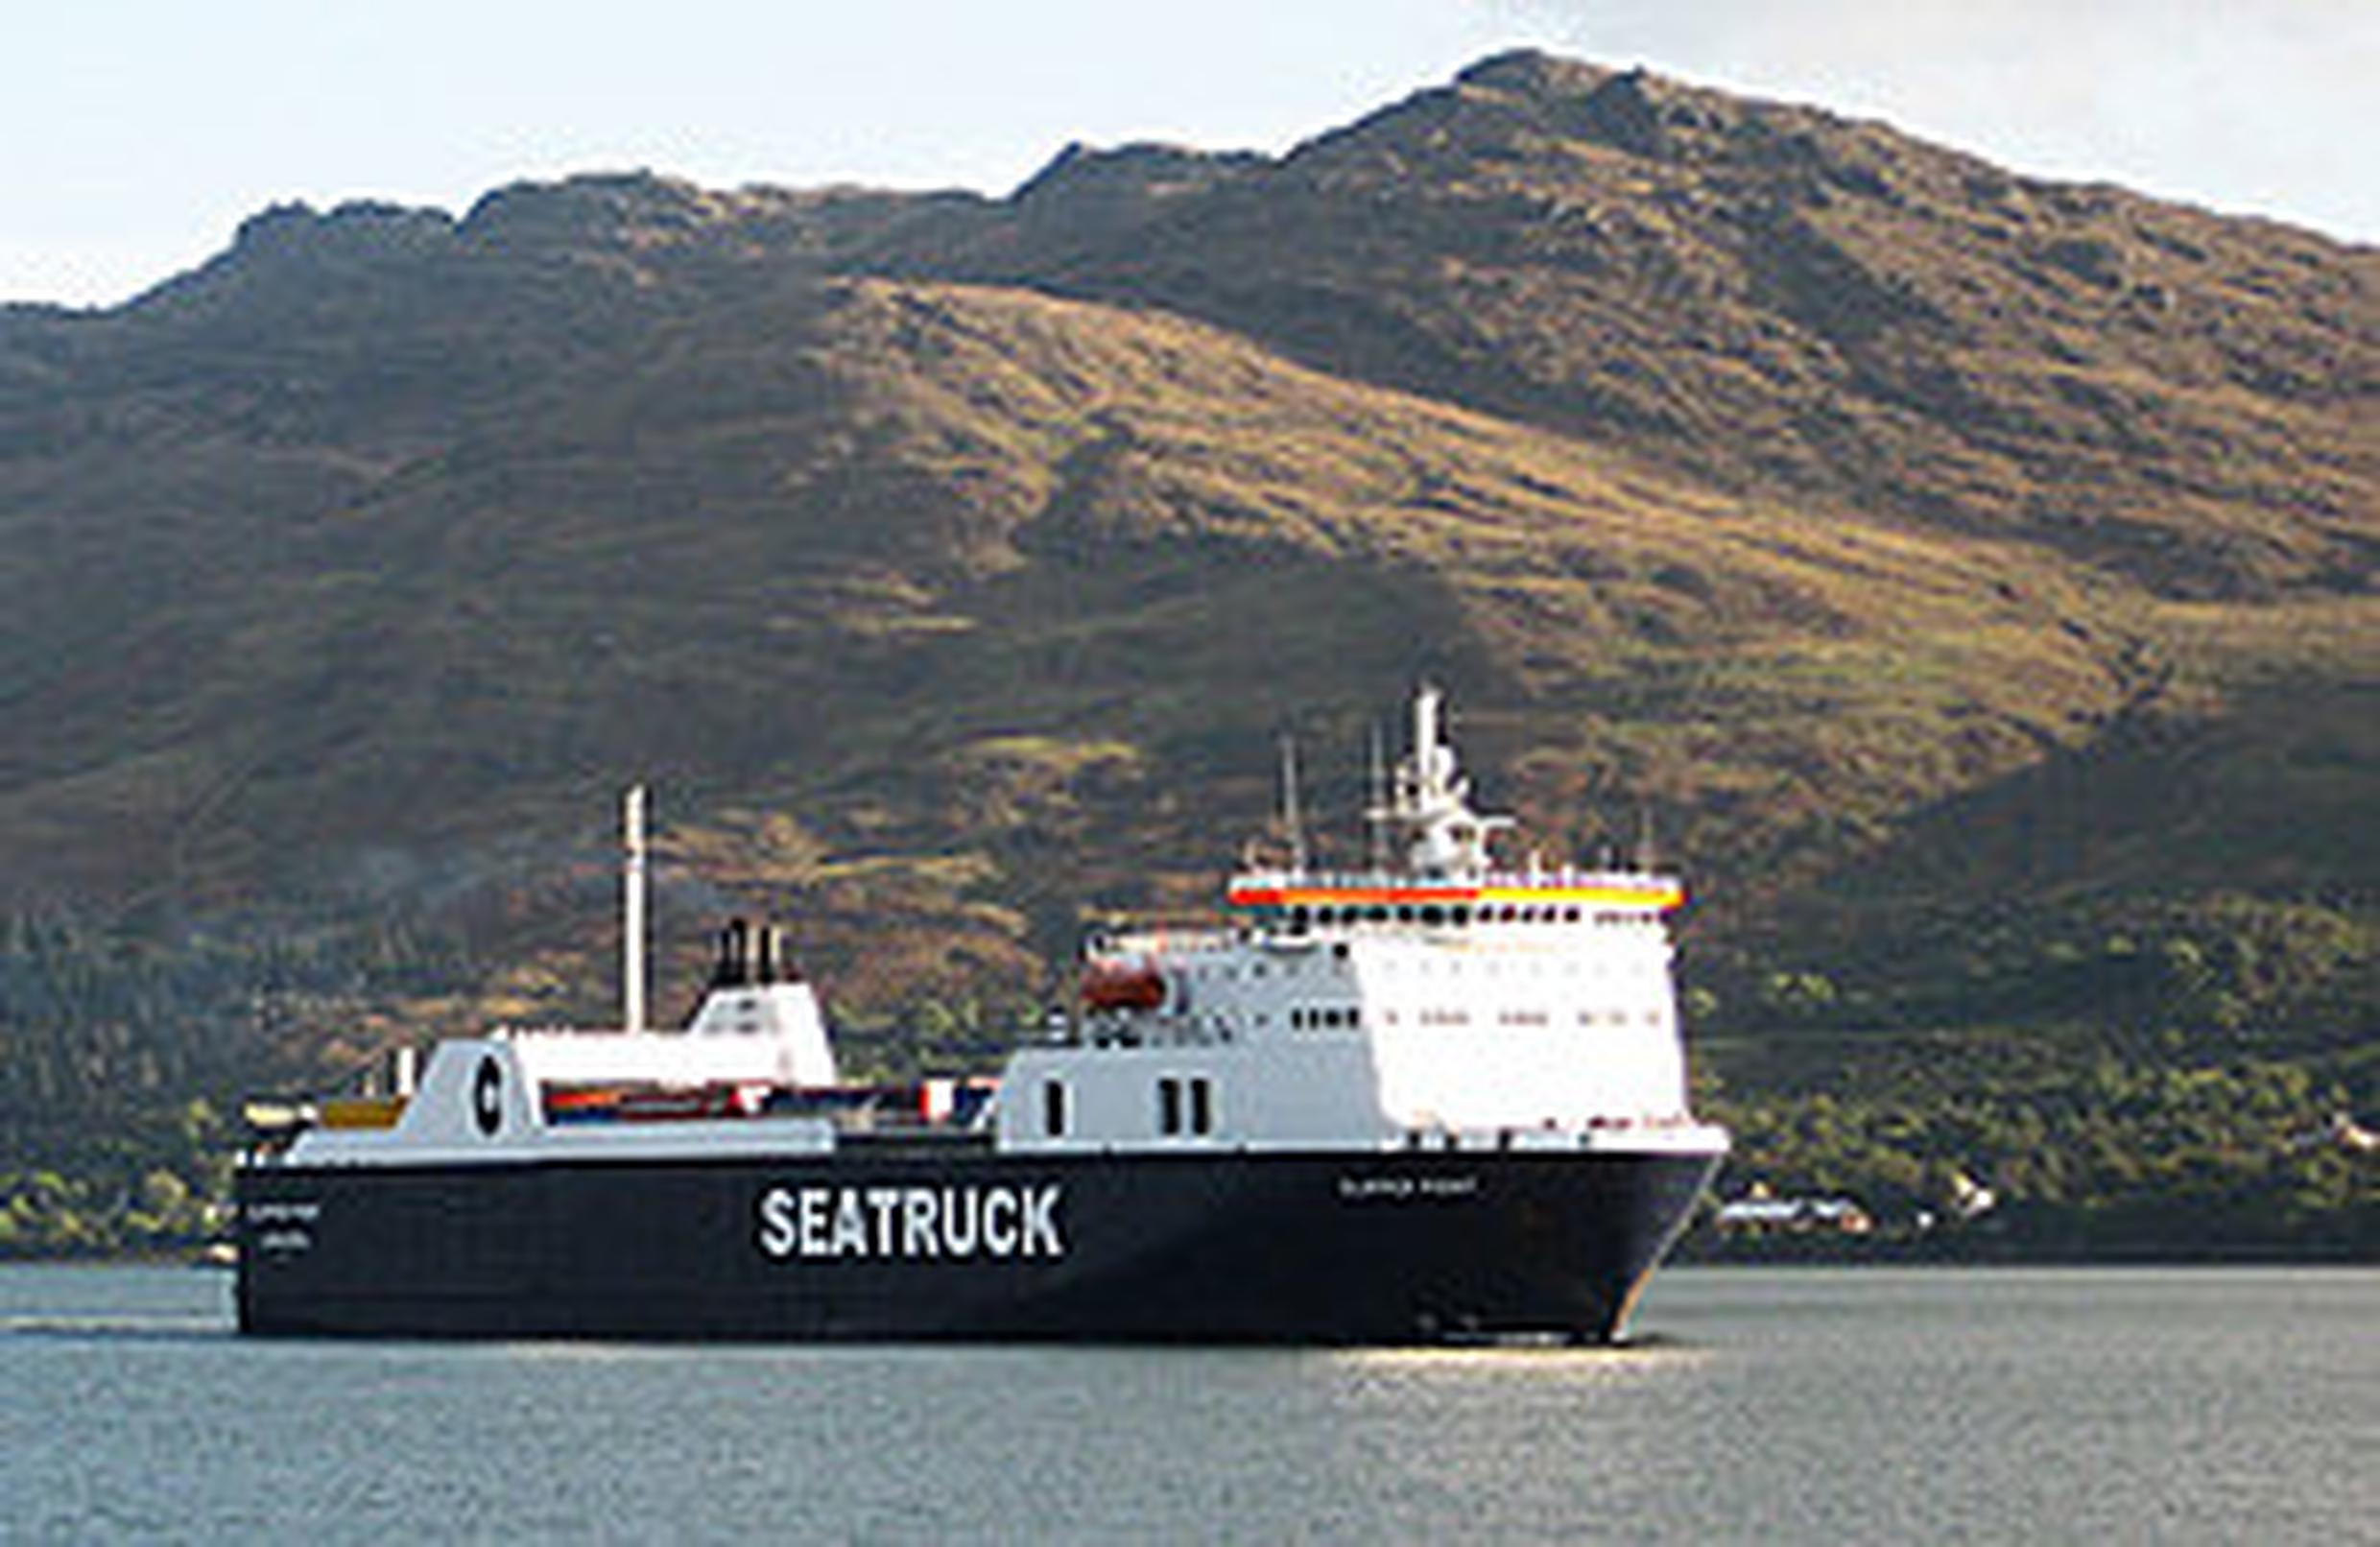 Ferry services to and from NI will be supported